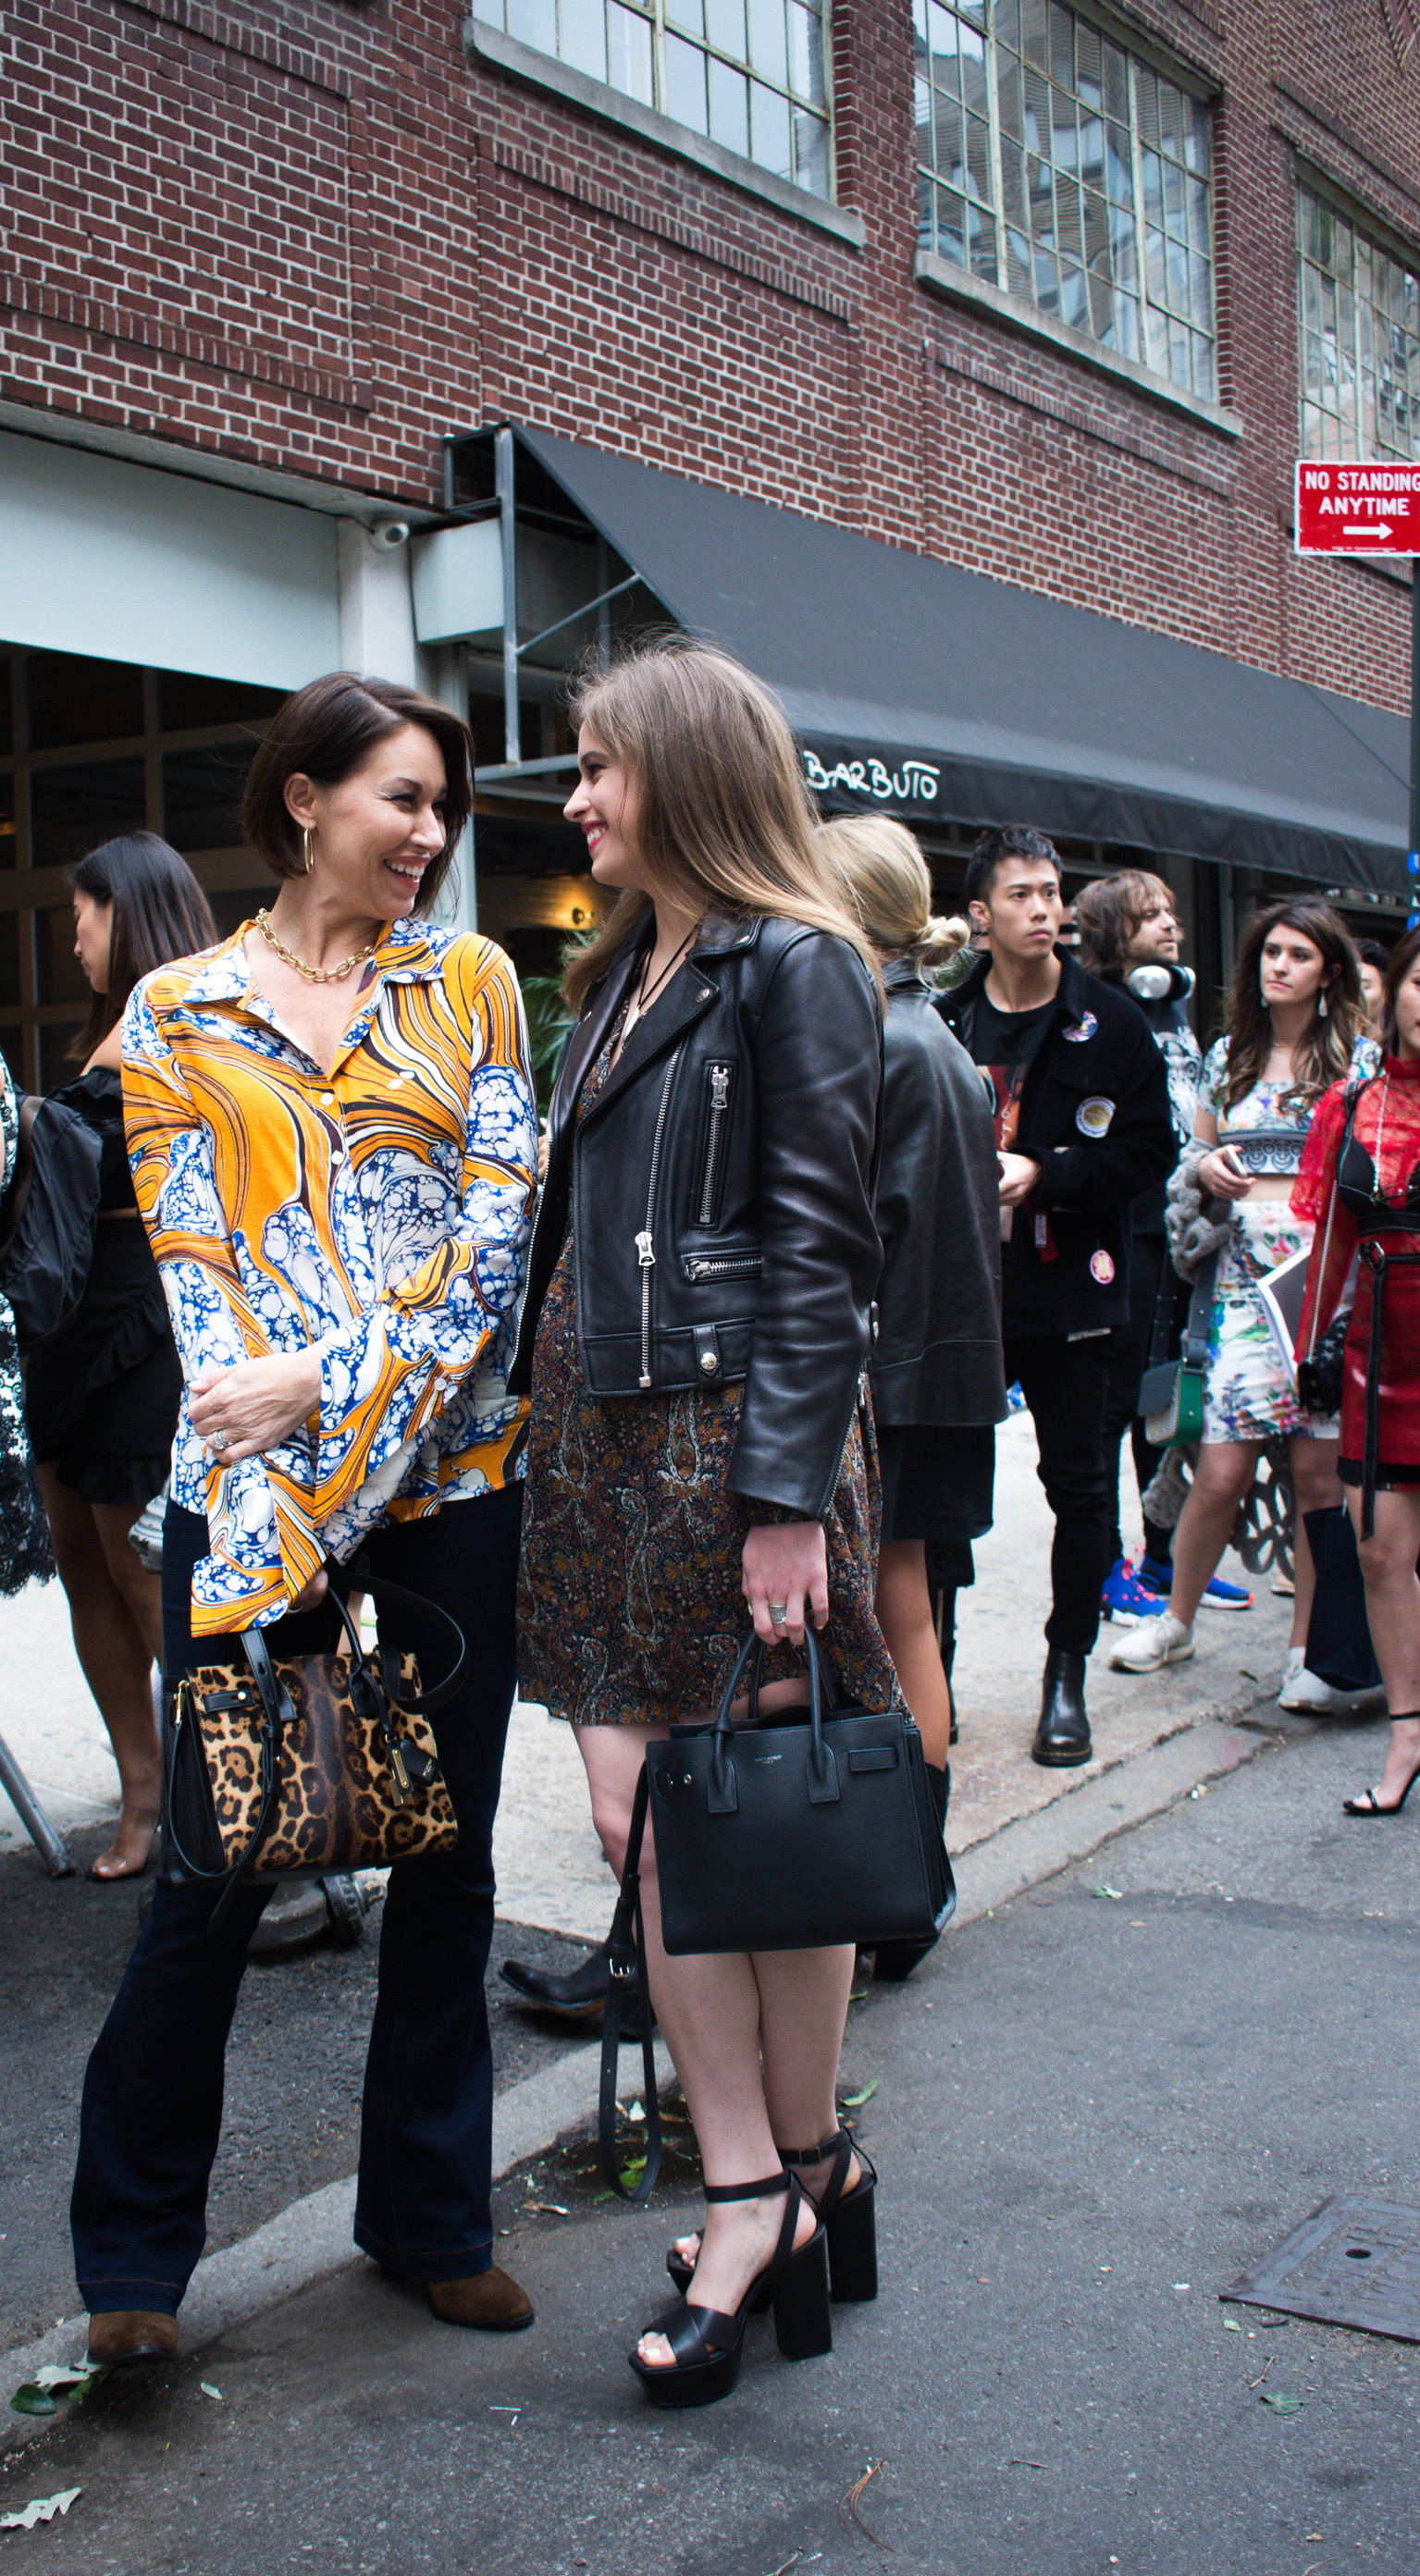 Two women standing outside a fashion show: one wearing an orange, white and blue button down top and the other is wearing a black leather jacket, printed dress and wedges